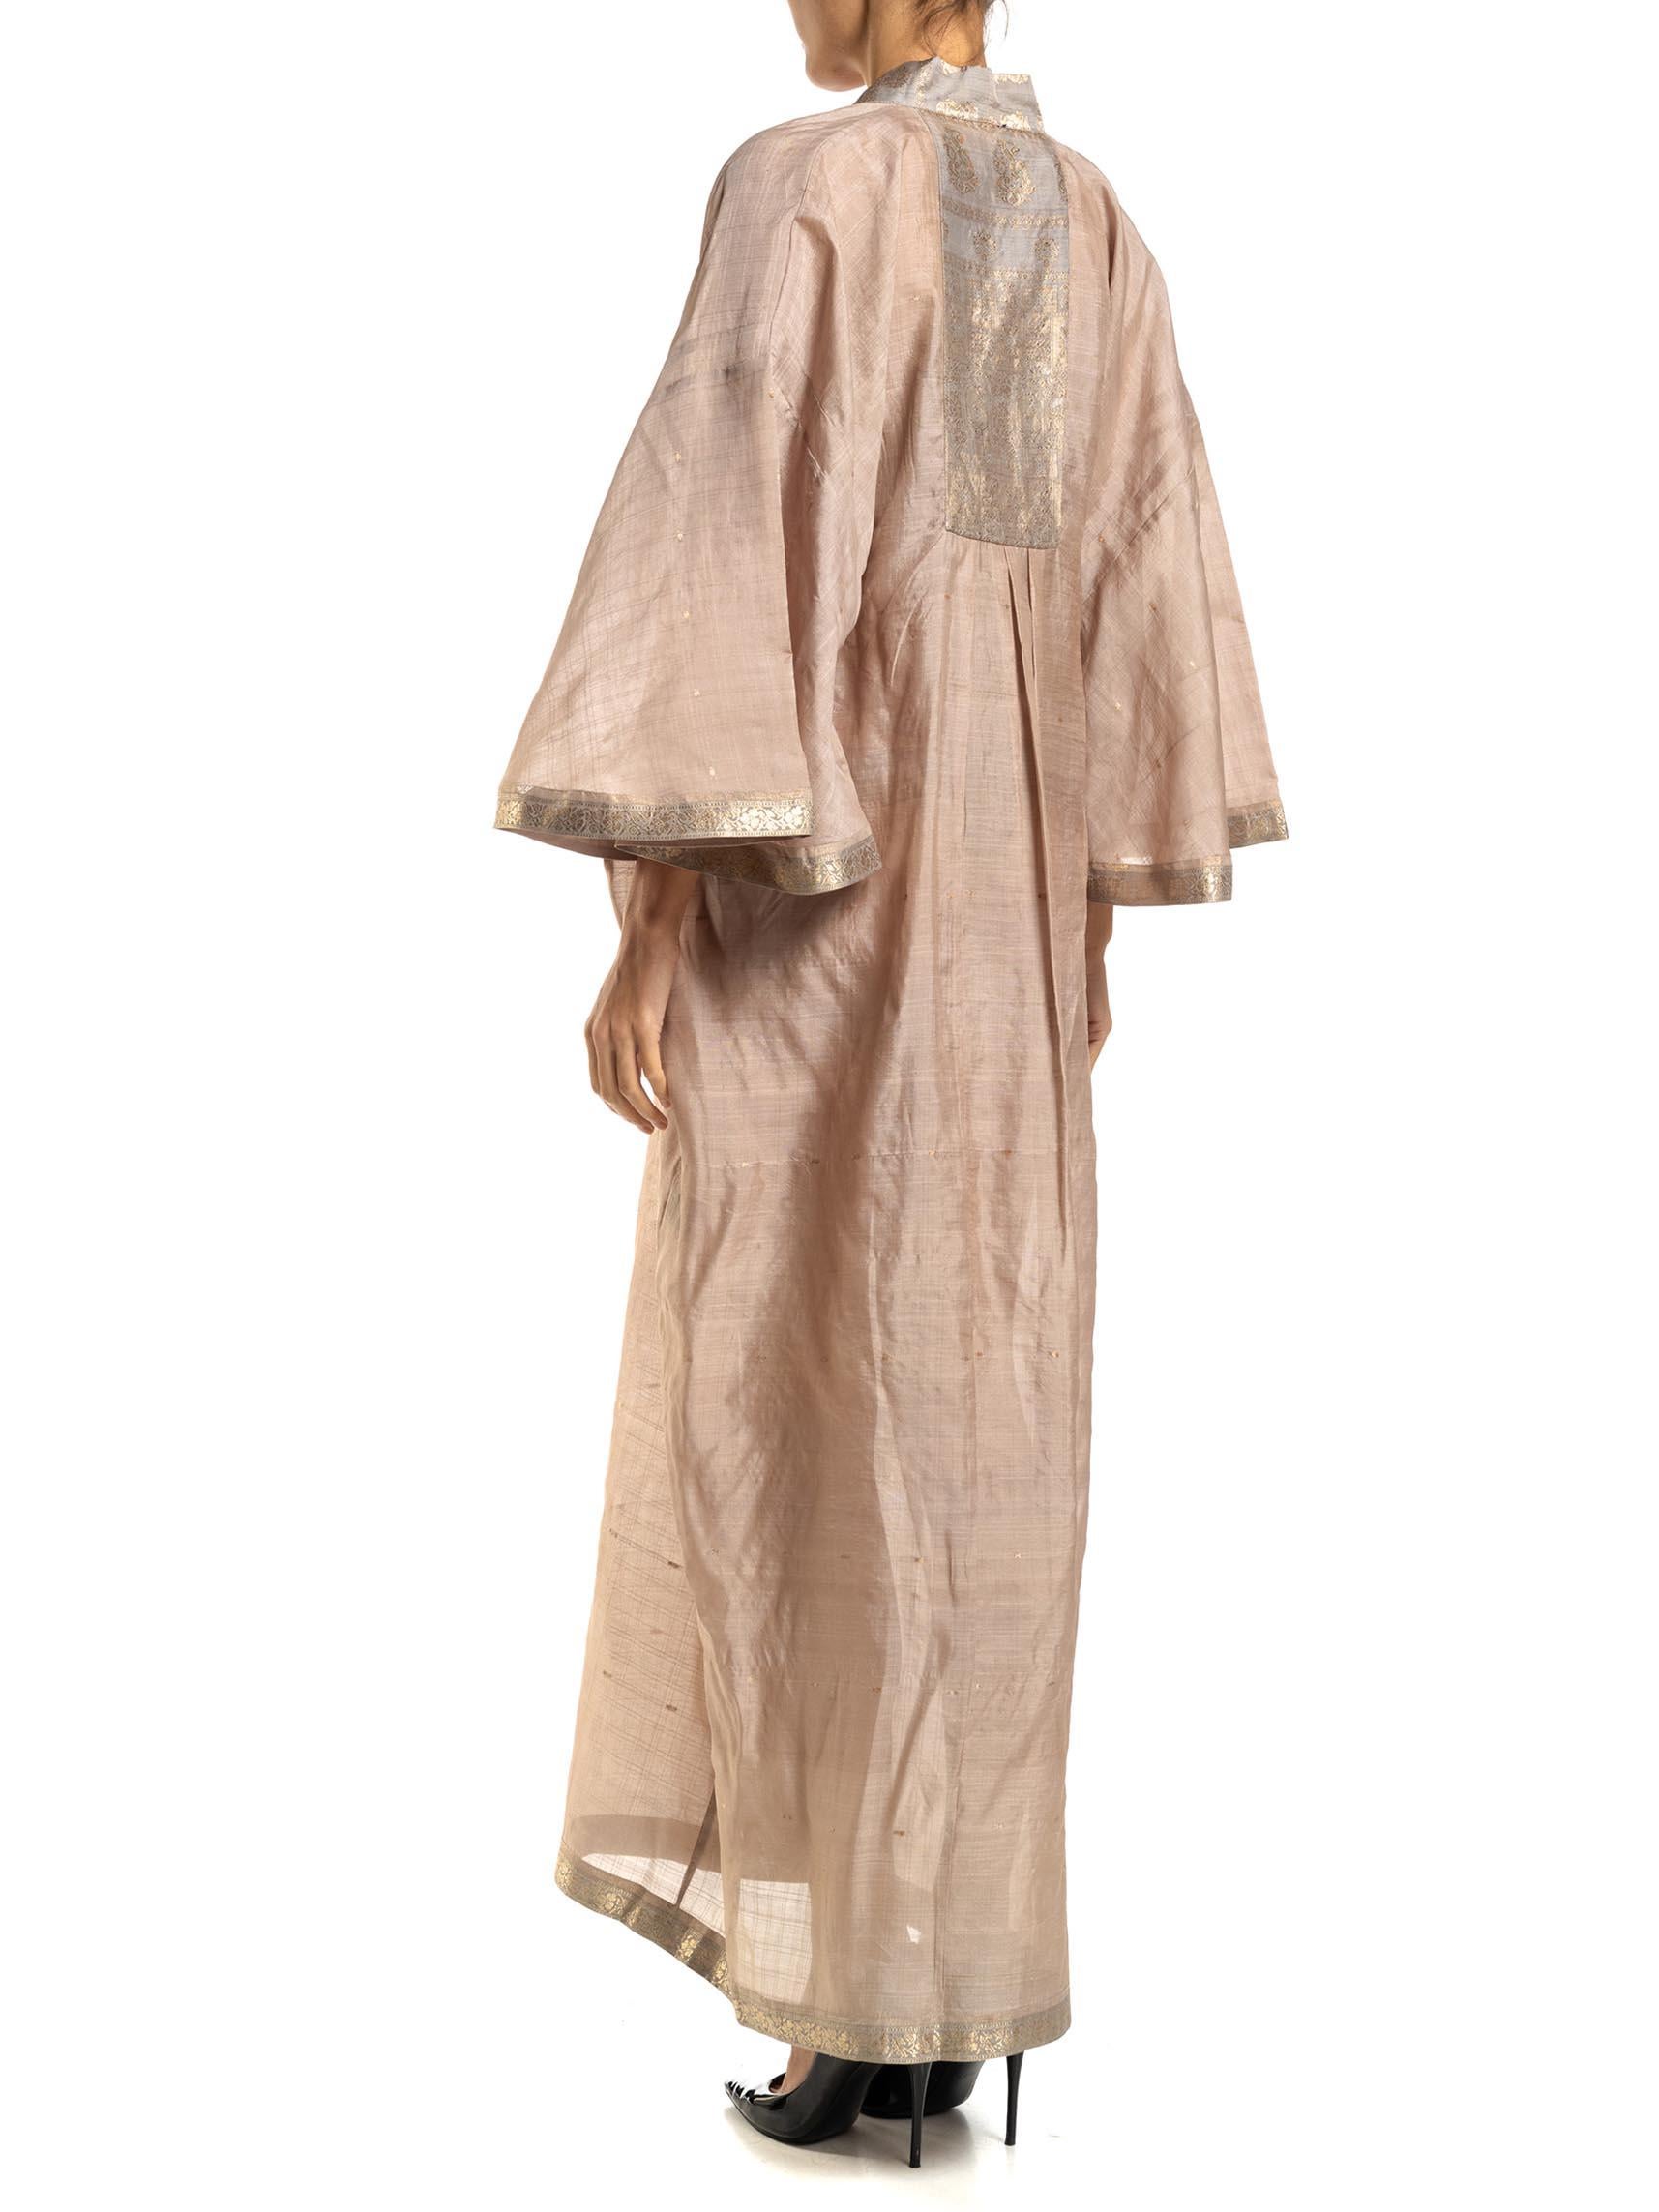 MORPHEW COLLECTION Dusty Pink Silk Kaftan Made From Vintage Sari For Sale 5